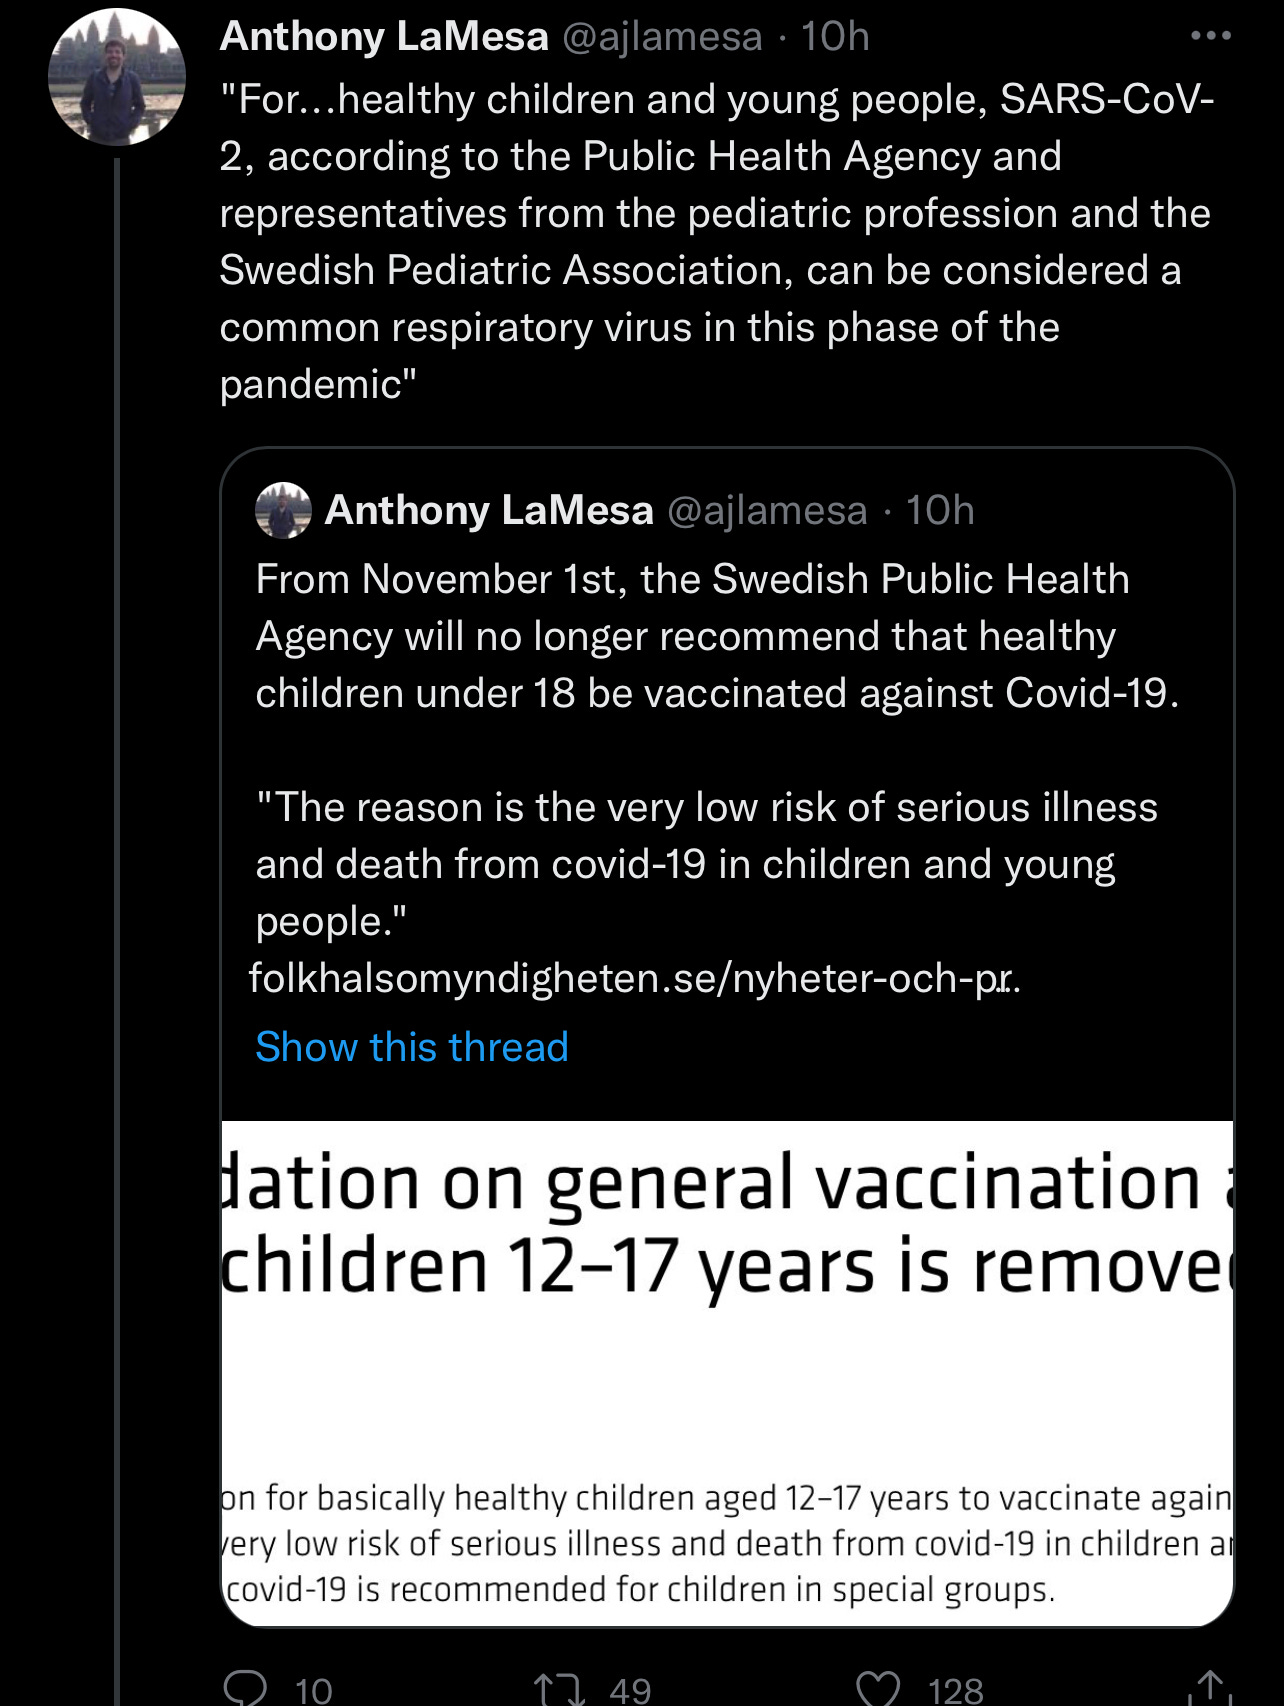 Anthony LaMesa posts a news article on how Sweden is no longer vaccinating children against COVID